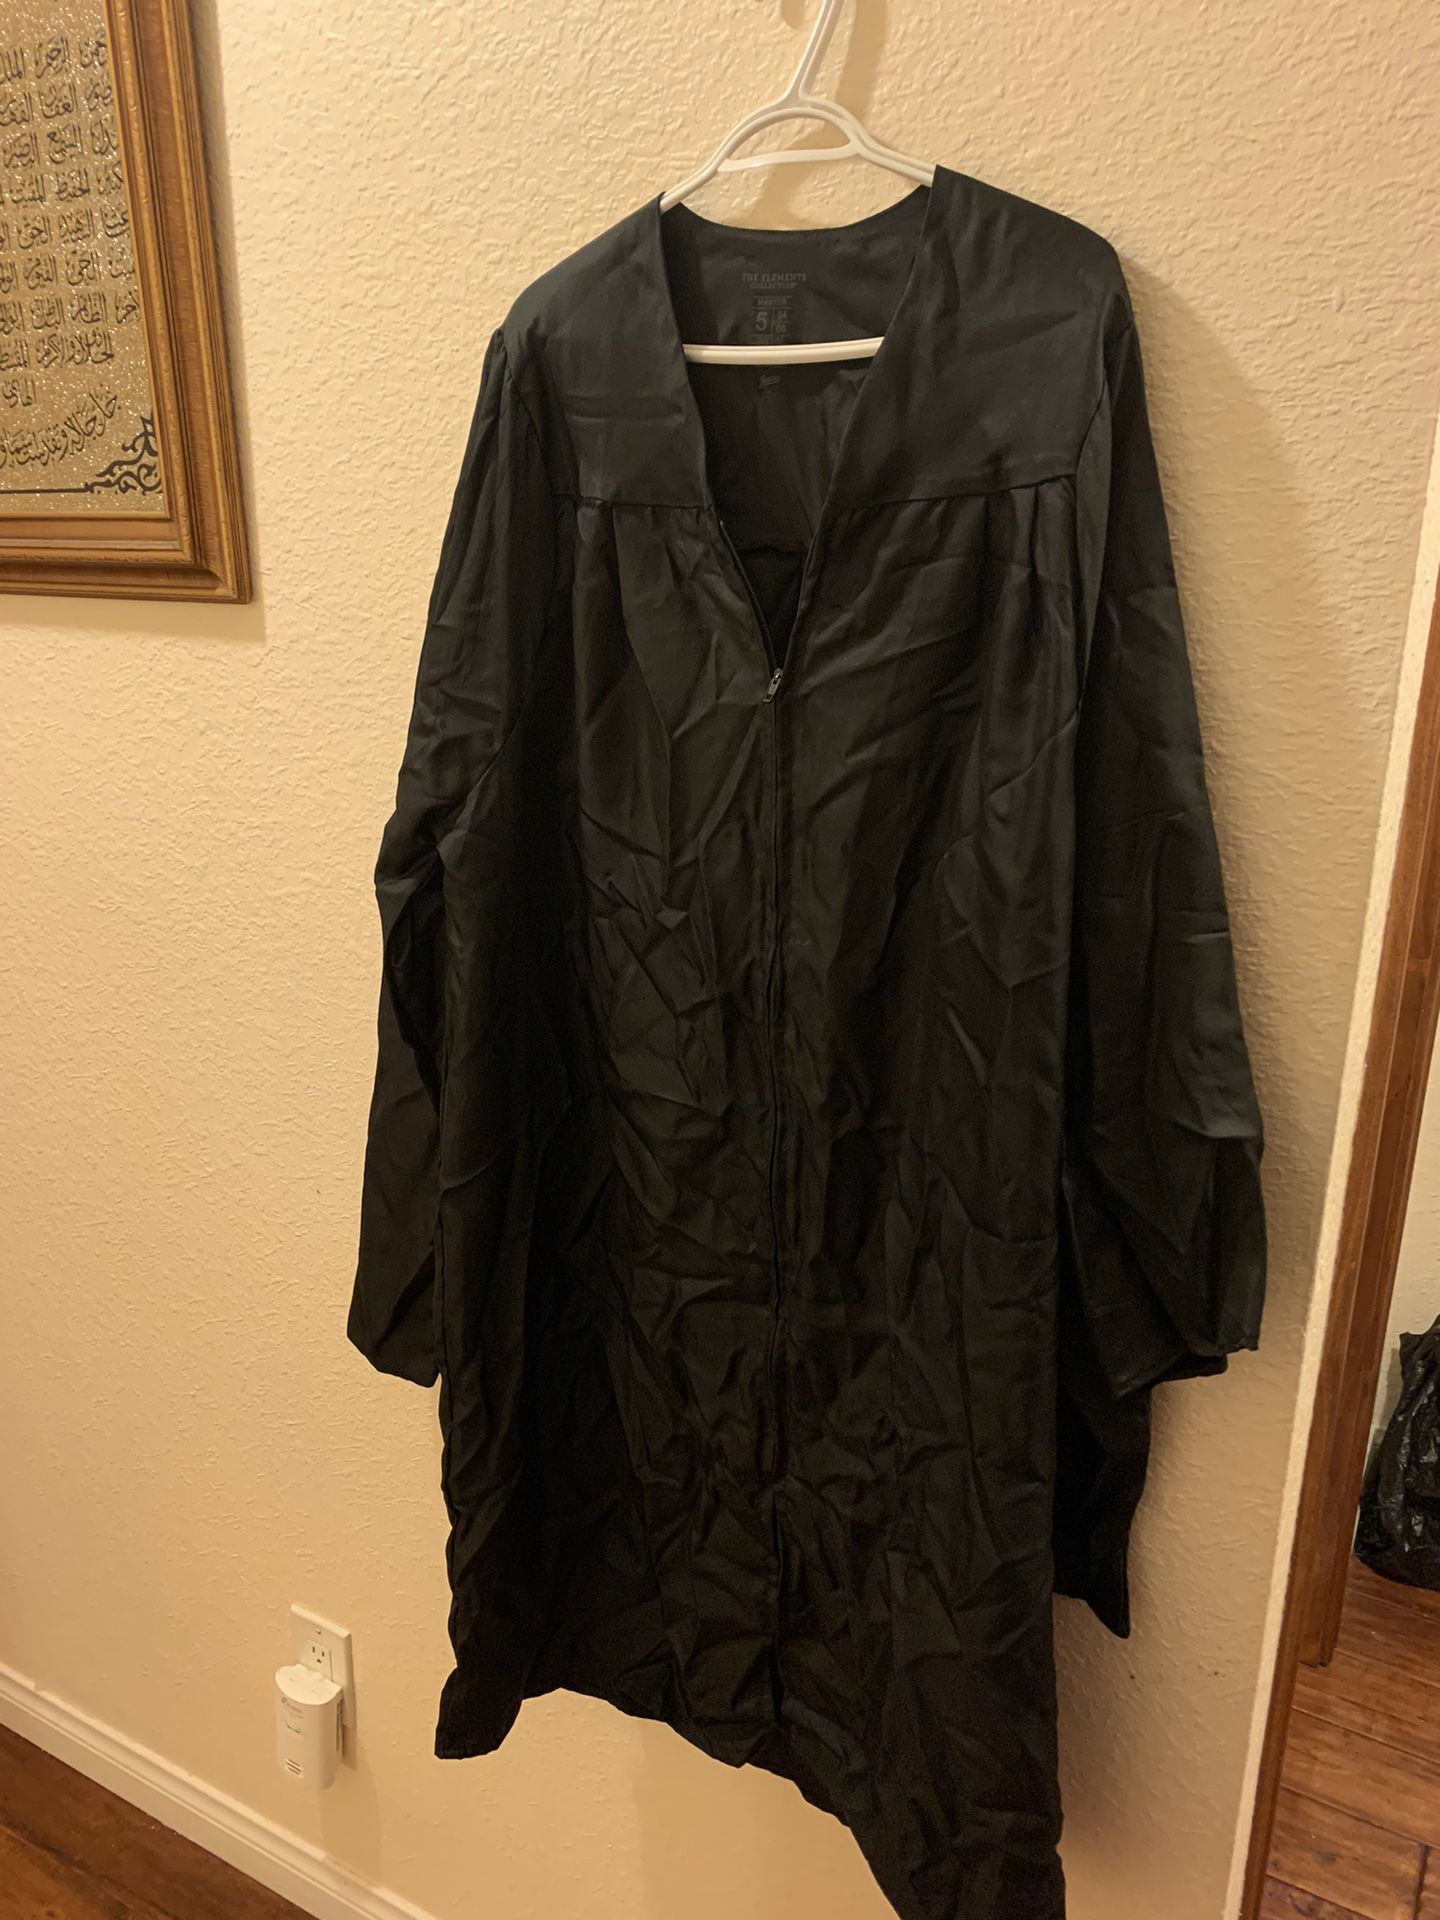 Master Graduation Gown with Hood - The Elections Collection 